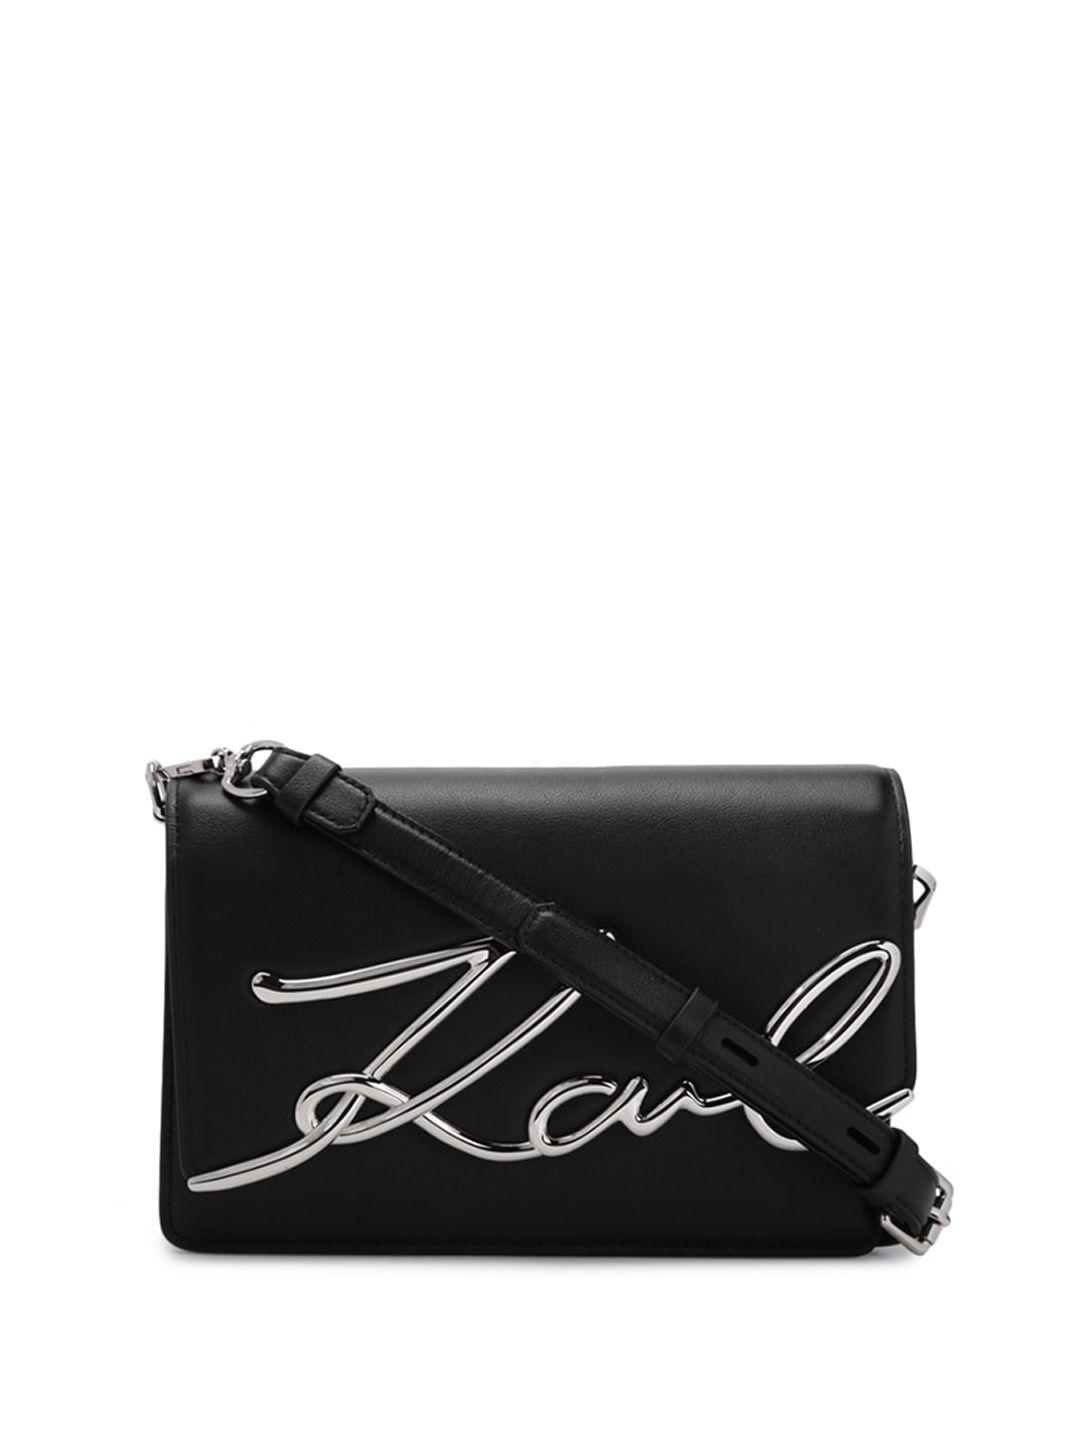 karl lagerfeld leather structured sling bag